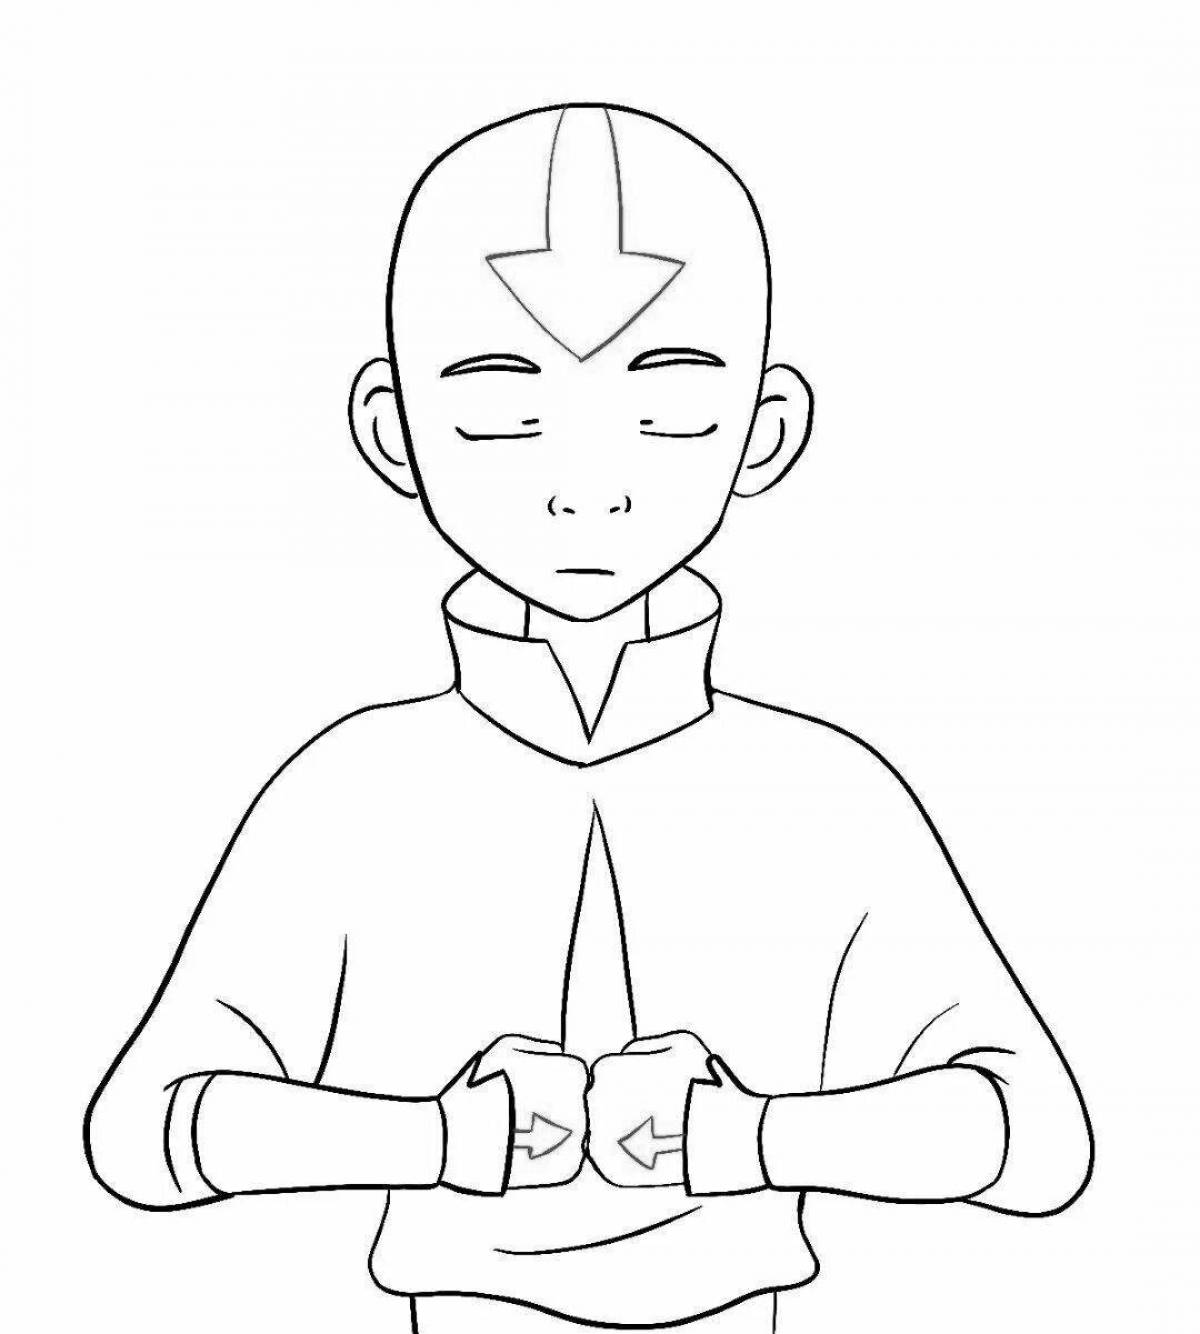 Aang's animated coloring page